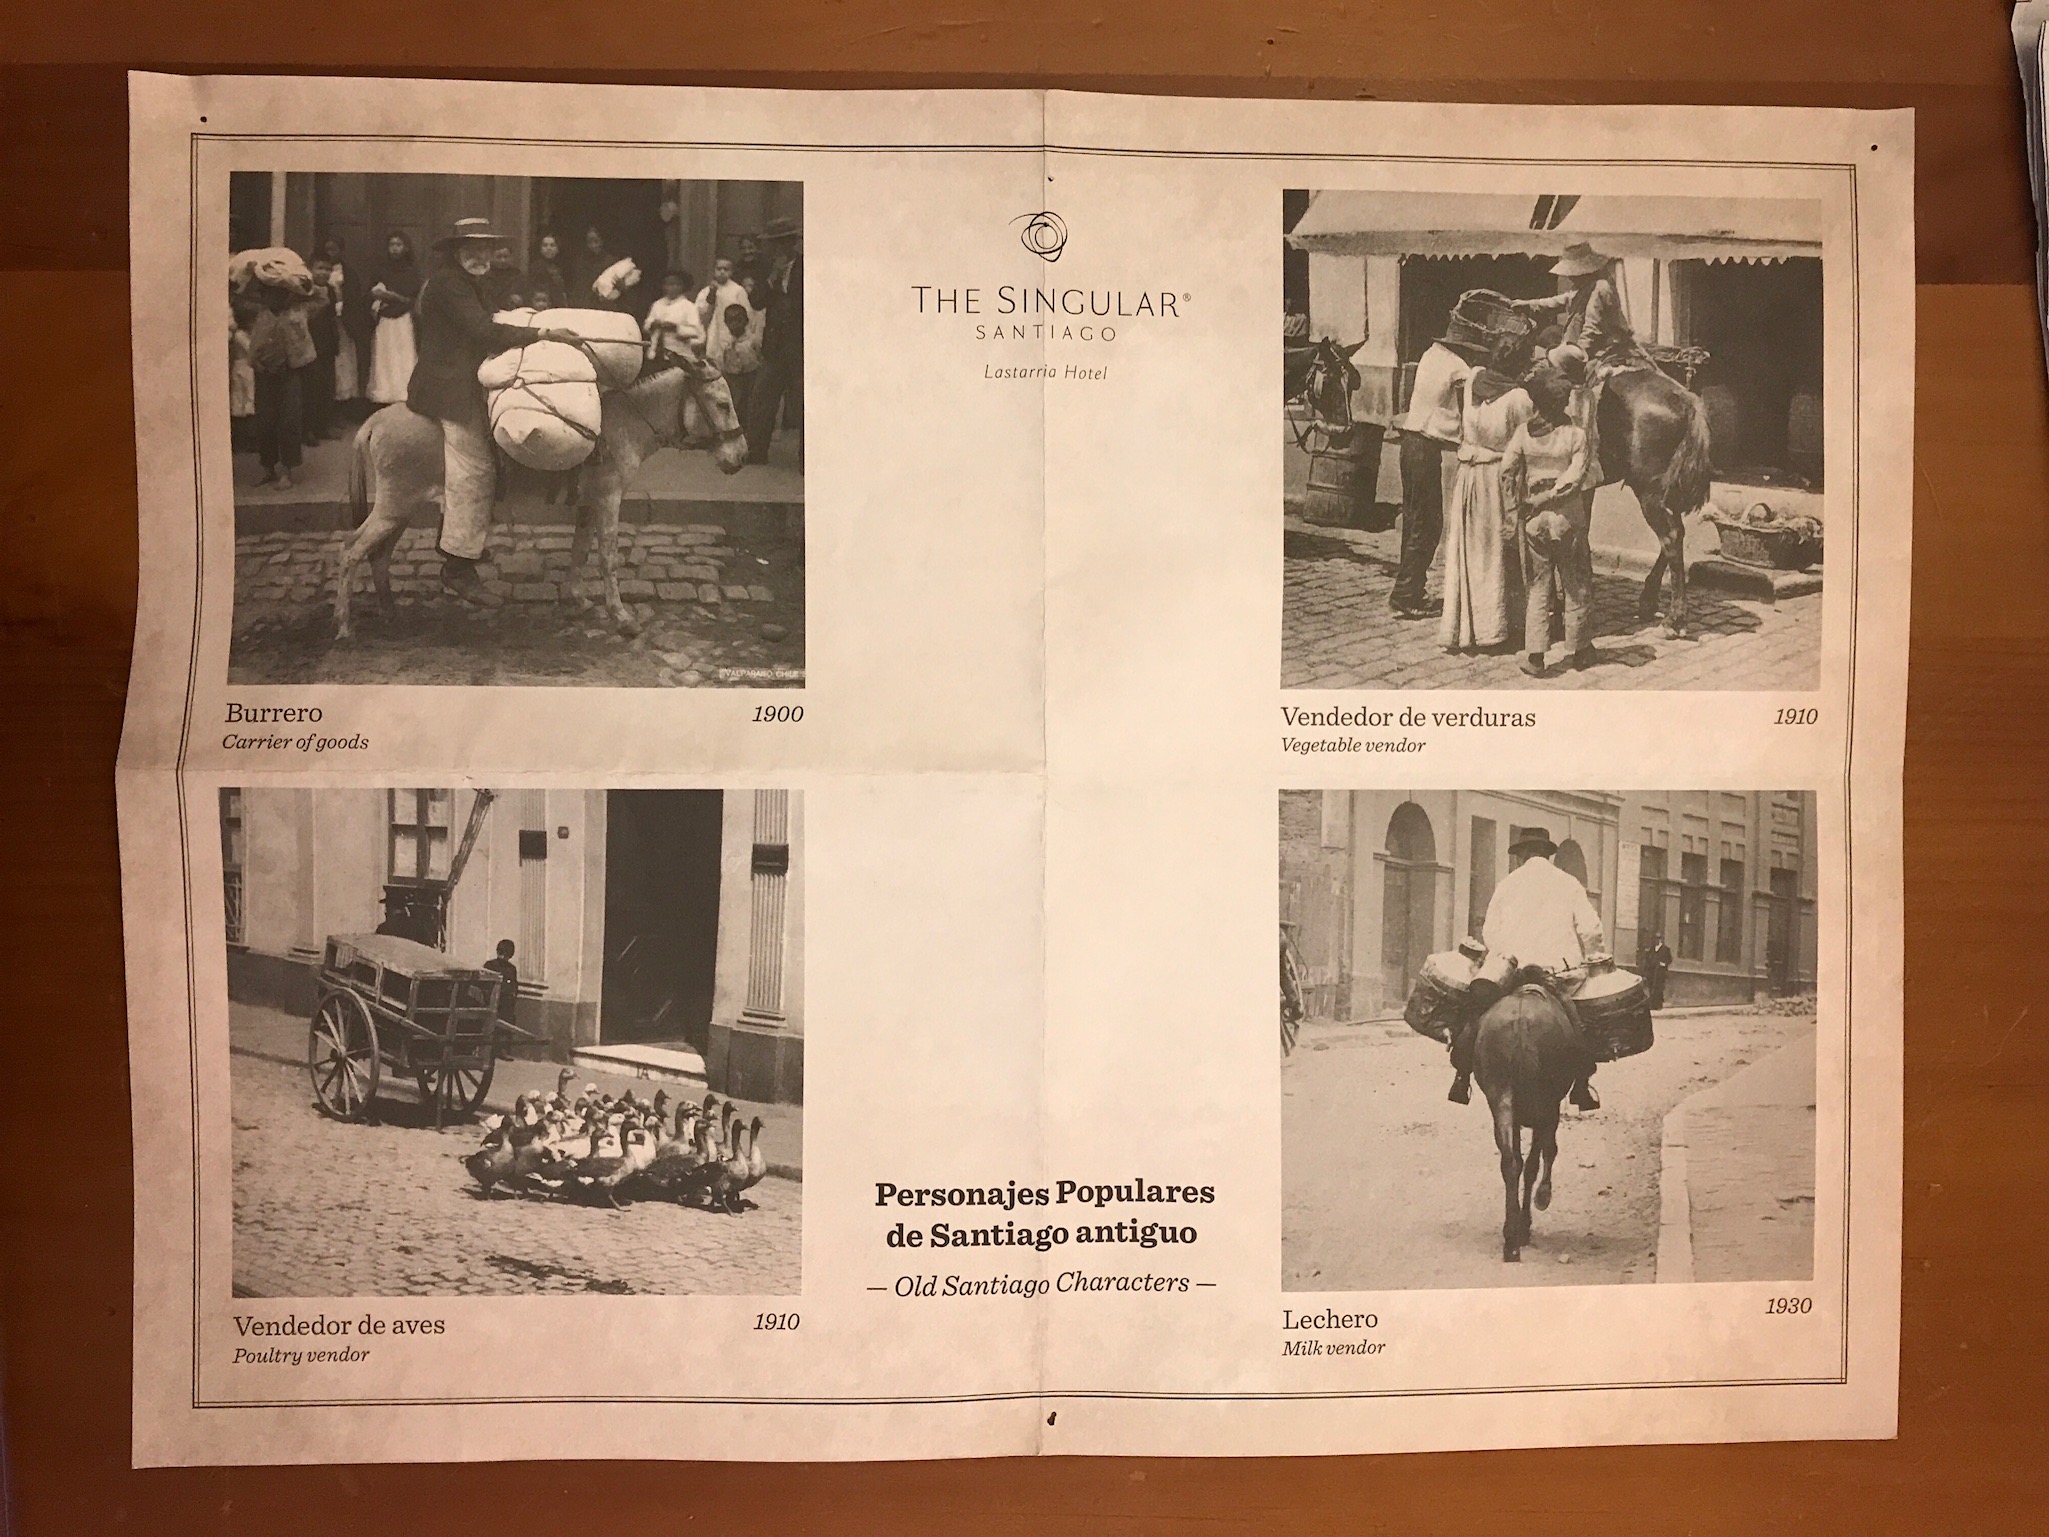 A placemat from The Singular, in Spanish and English, displays old photos of food vendors.